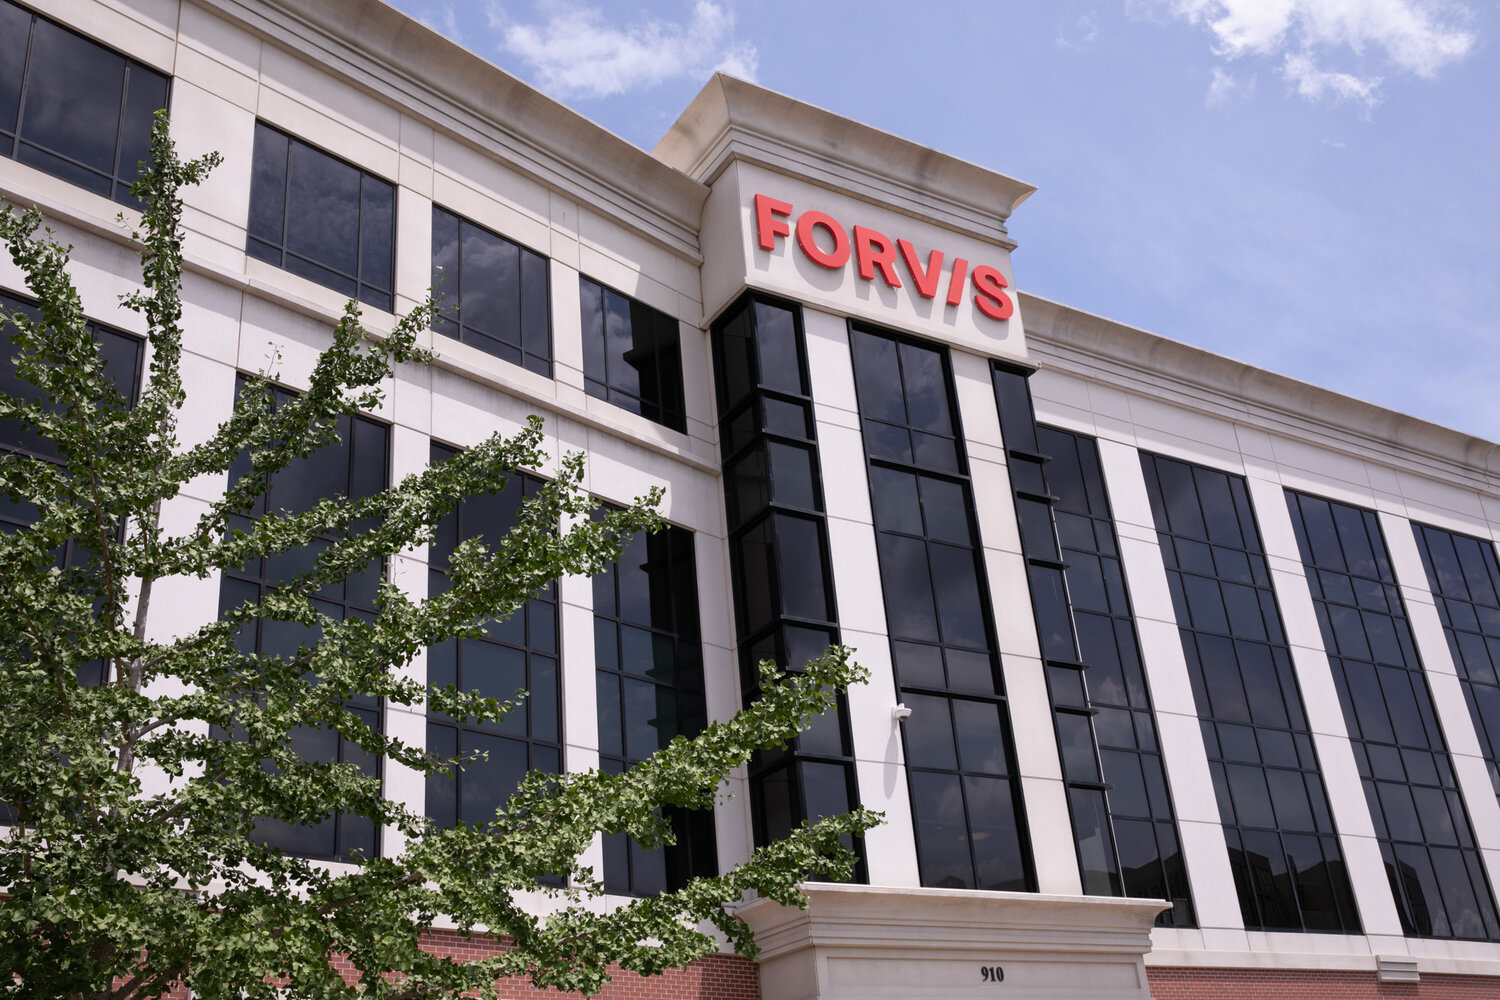 FORVIS has signed on to acquire the assets of Thales Consulting.